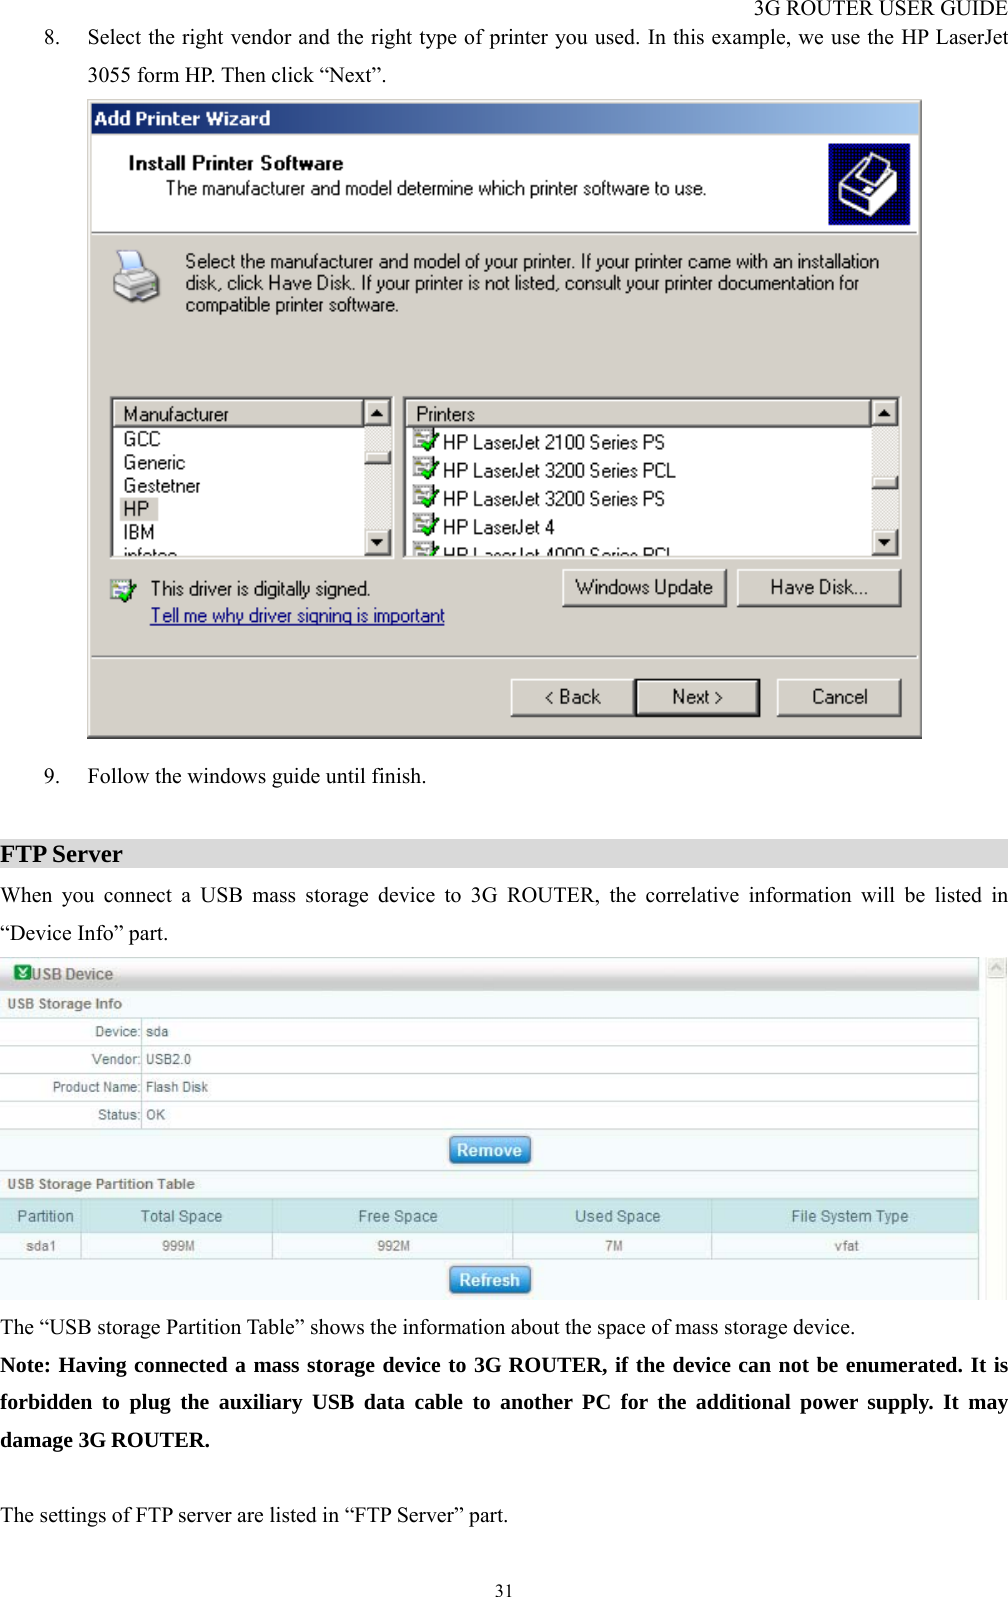 3G ROUTER USER GUIDE  318. Select the right vendor and the right type of printer you used. In this example, we use the HP LaserJet 3055 form HP. Then click “Next”.   9. Follow the windows guide until finish.  FTP Server                                                                         When you connect a USB mass storage device to 3G ROUTER, the correlative information will be listed in “Device Info” part.  The “USB storage Partition Table” shows the information about the space of mass storage device. Note: Having connected a mass storage device to 3G ROUTER, if the device can not be enumerated. It is forbidden to plug the auxiliary USB data cable to another PC for the additional power supply. It may damage 3G ROUTER.  The settings of FTP server are listed in “FTP Server” part. 